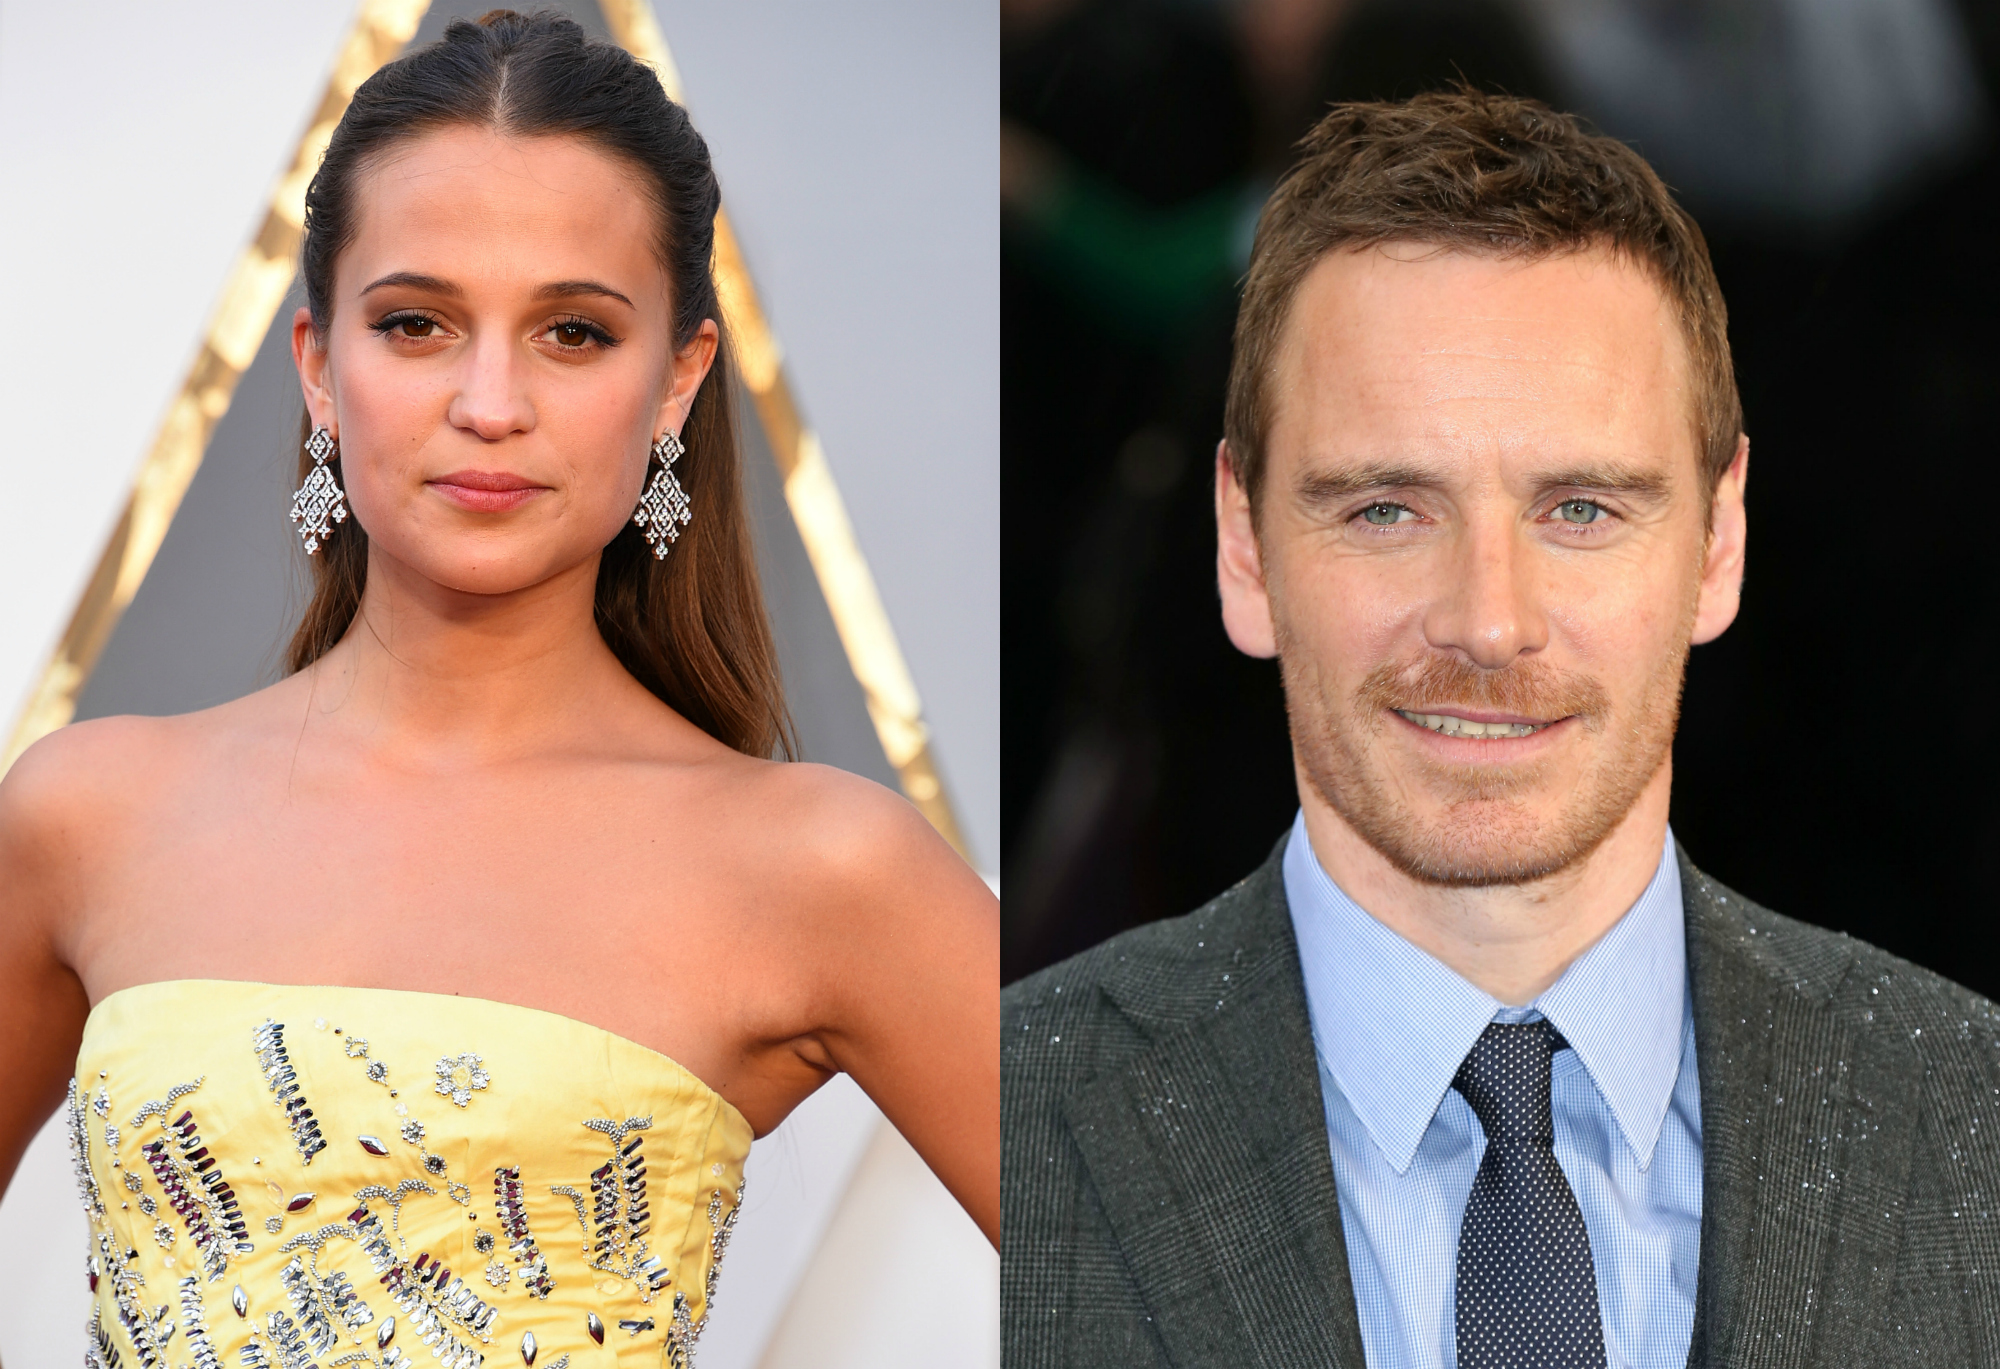 Alicia Vikander and Michael Fassbender step out for a walk with